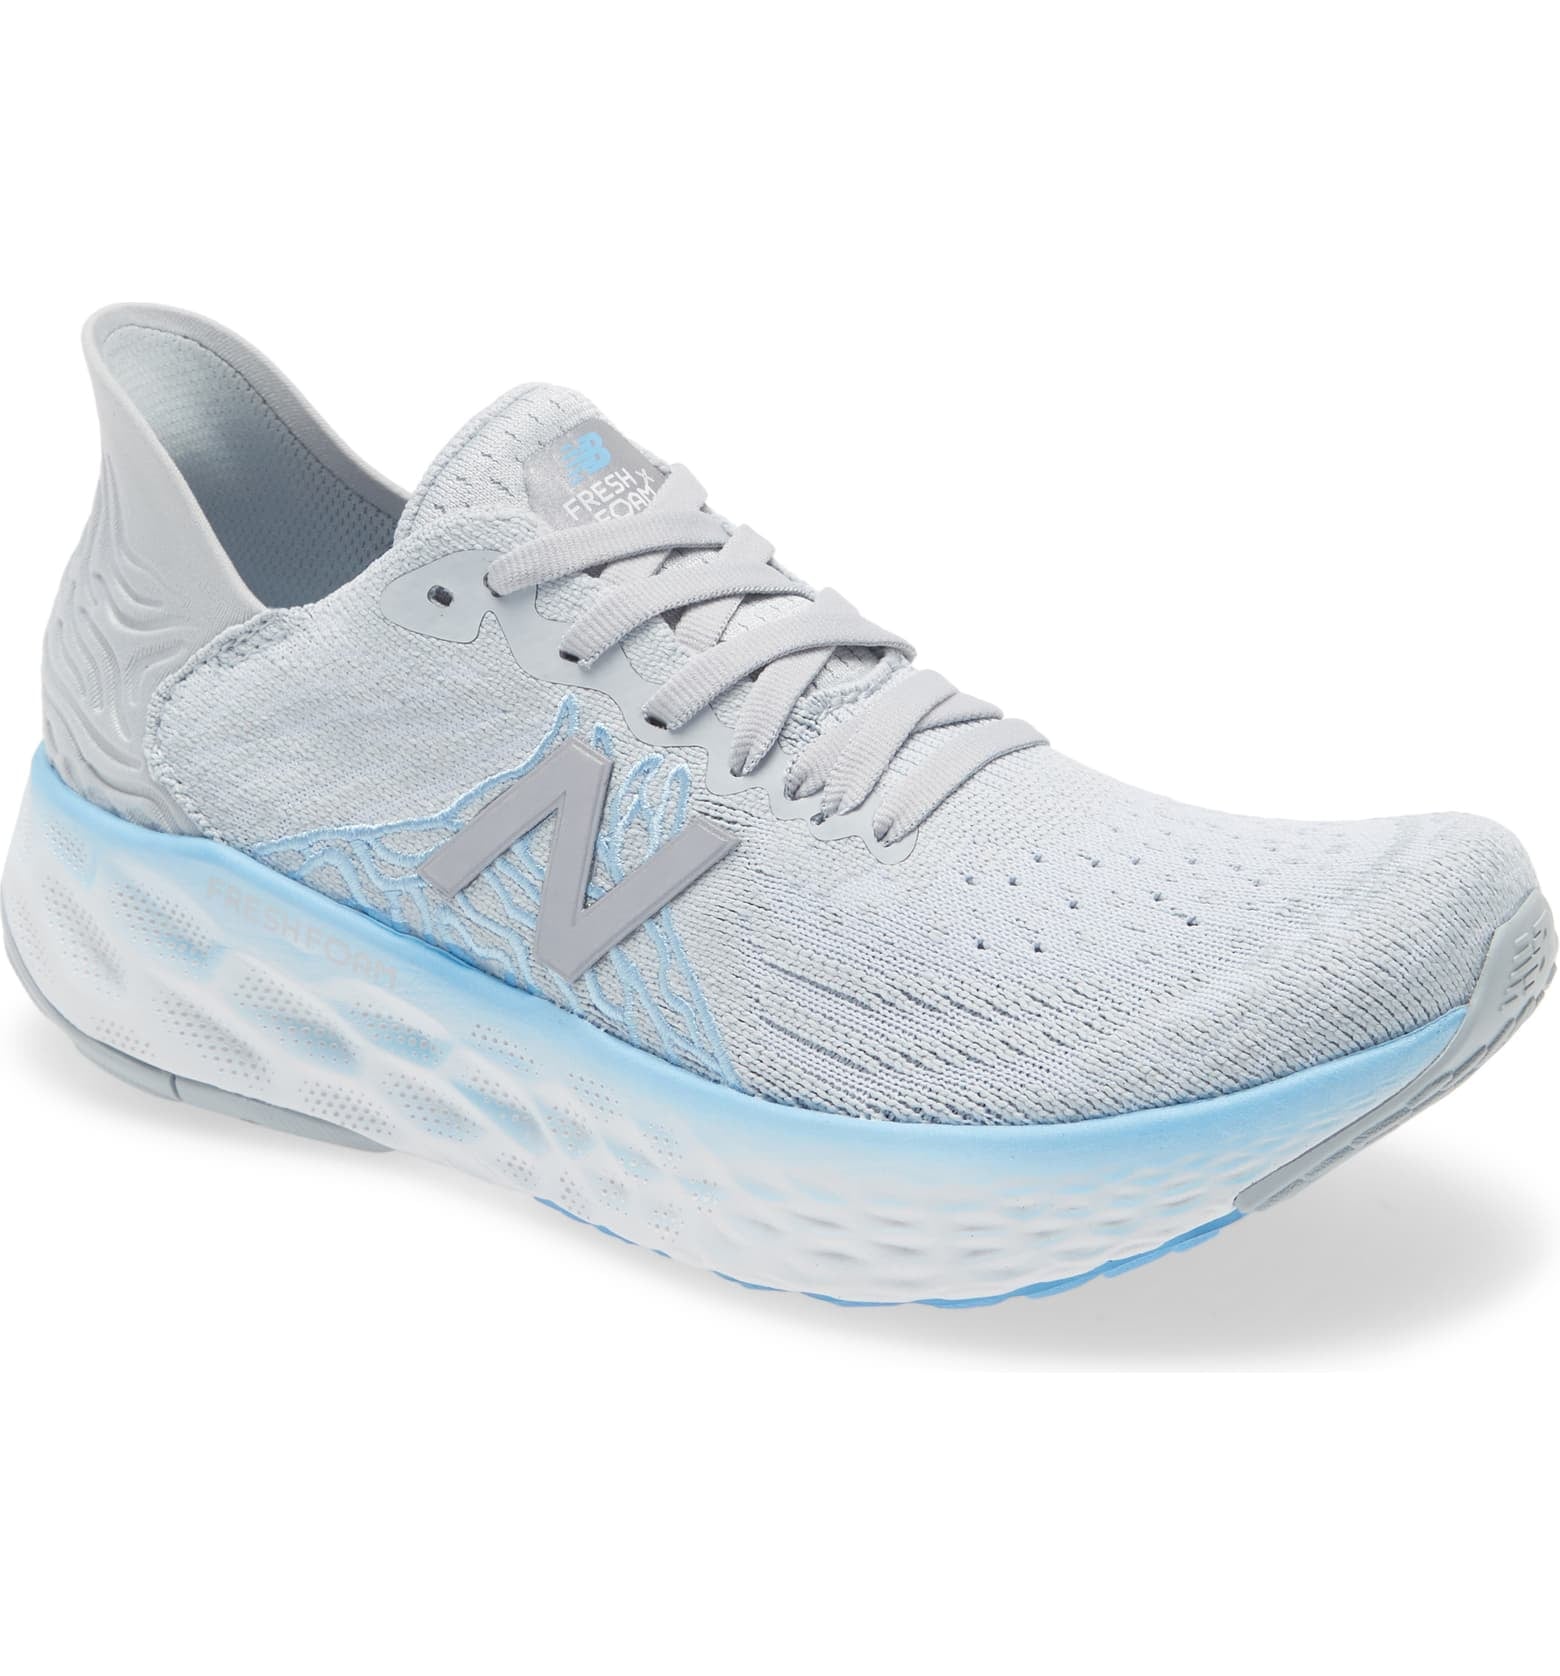 nb running clothes